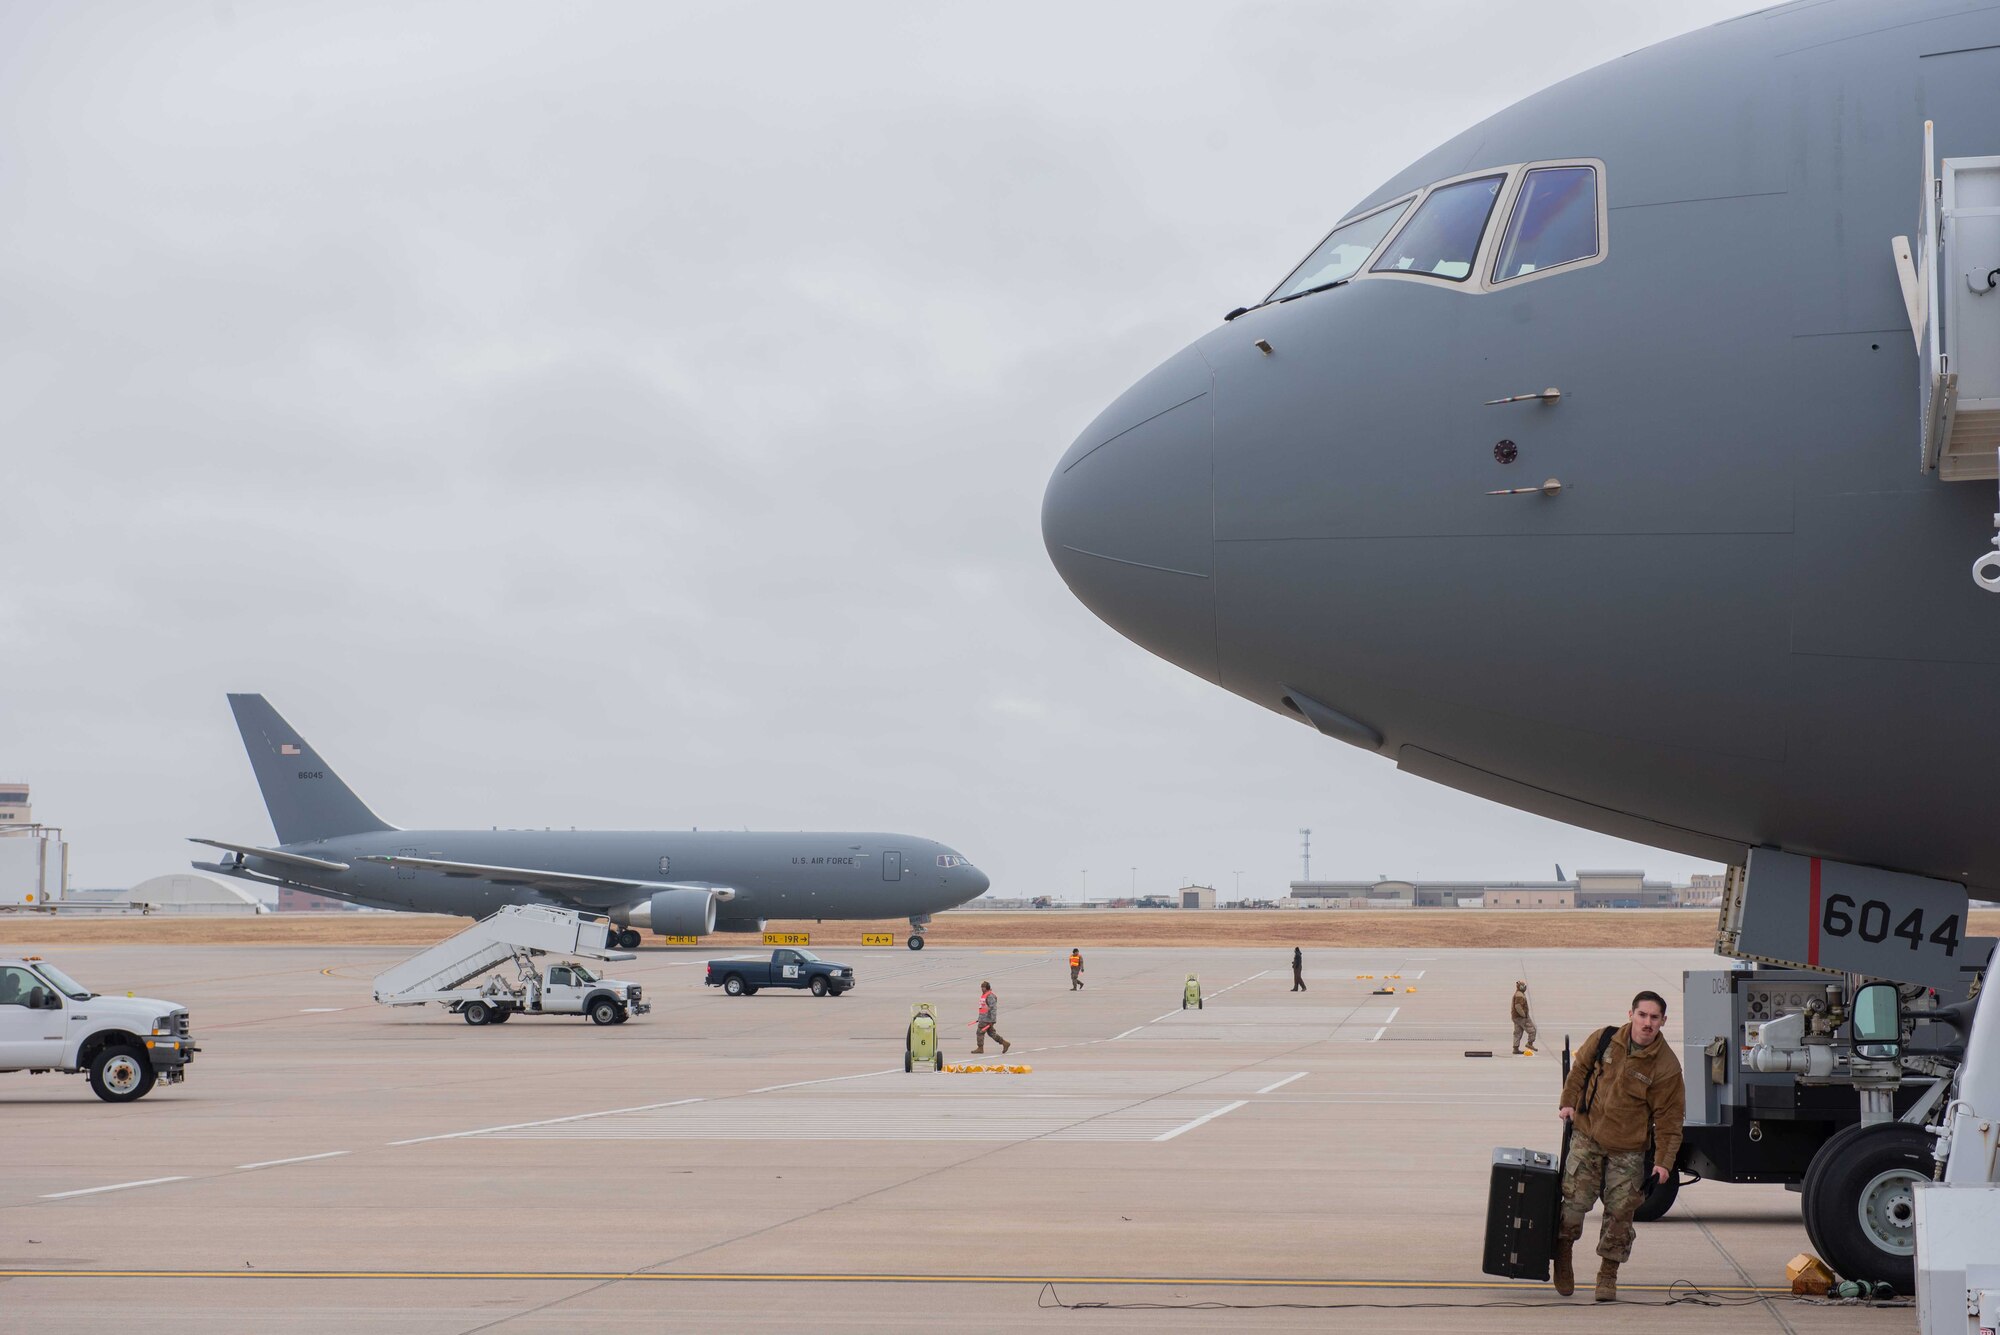 McConnell’s 19th KC-46 Pegasus taxis upon delivery, which arrived with two other aircraft Nov. 22, 2019, at McConnell Air Force Base, Kan. McConnell has 19 KC-46s, the Air Force’s newest aircraft, which is the future of aerial refueling. (U.S. Air Force photo by Staff Sgt. Chris Thornbury)